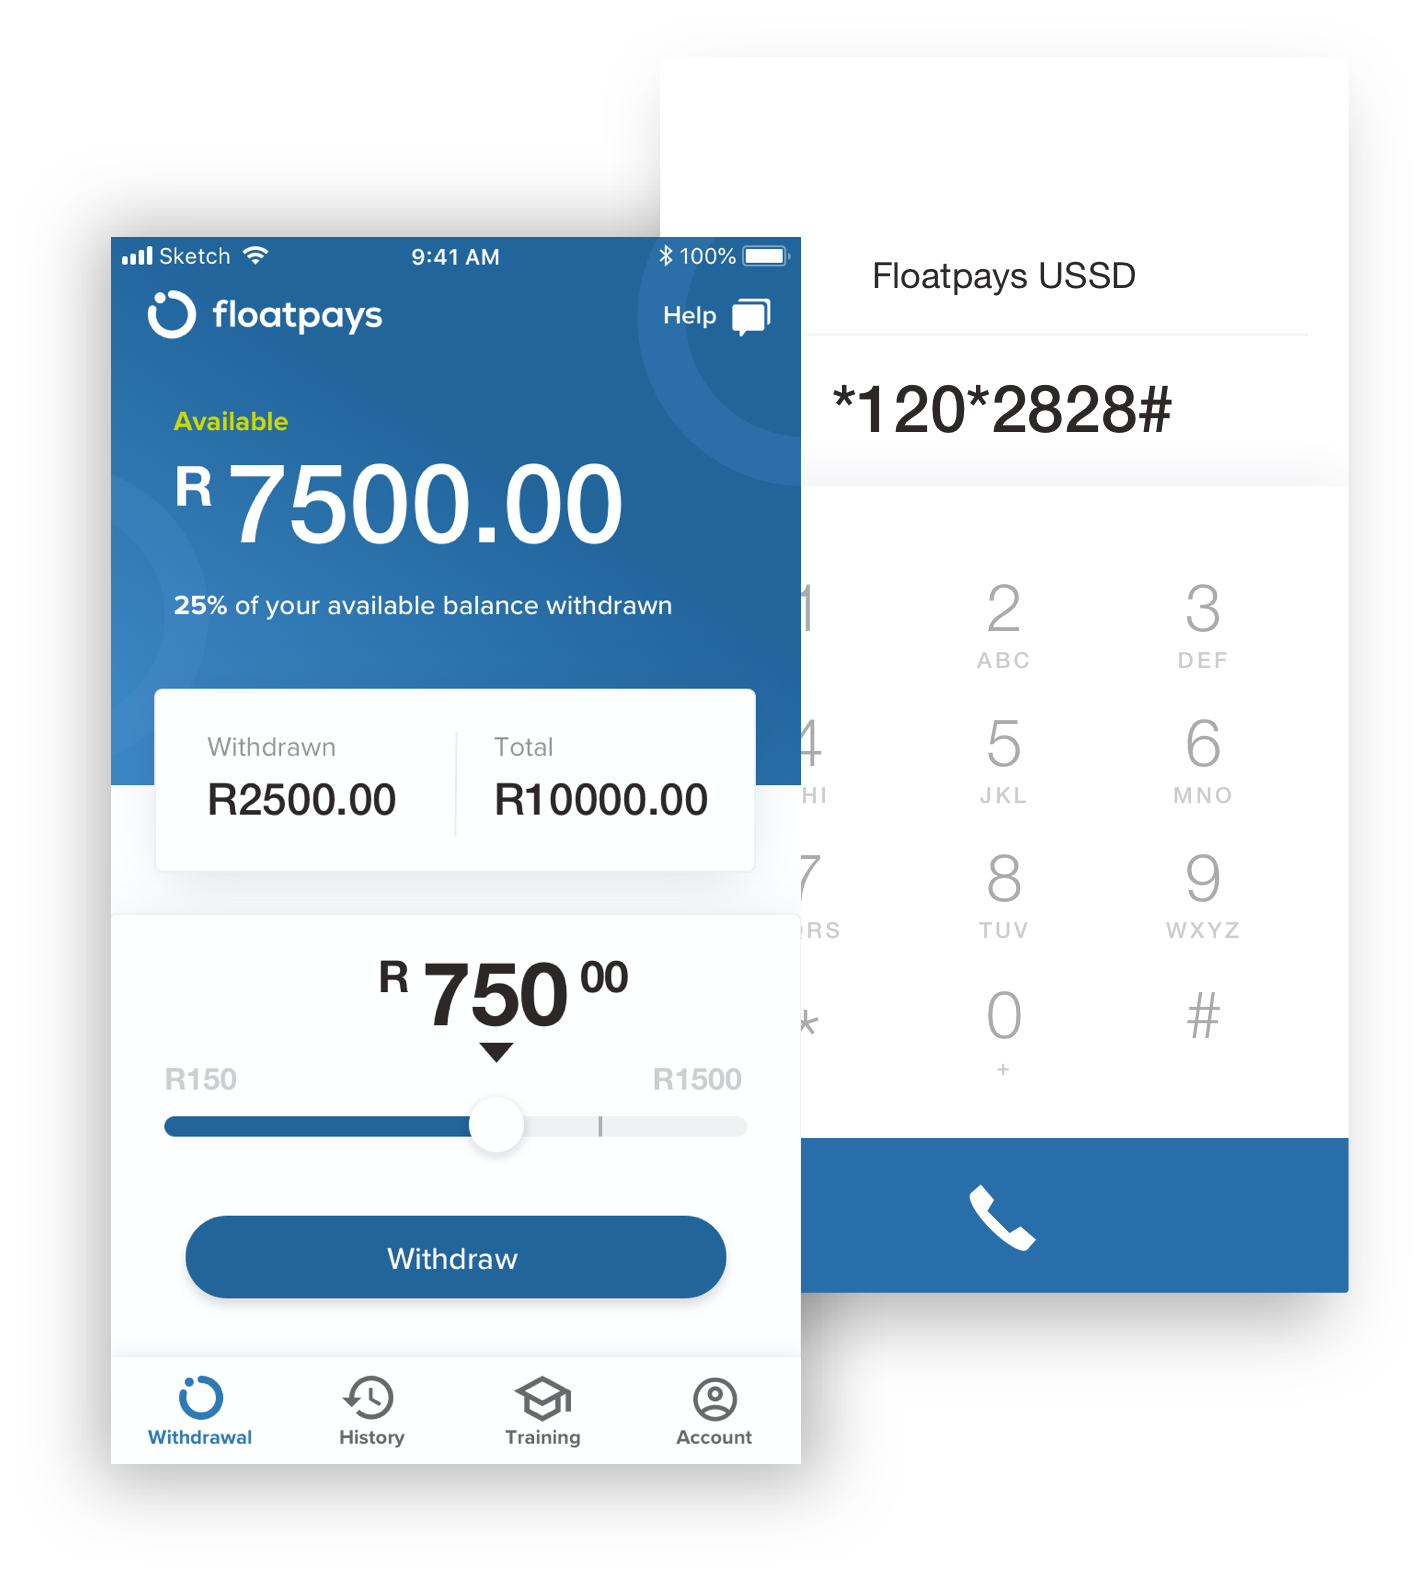 Floatpays – Financial wellbeing made simple